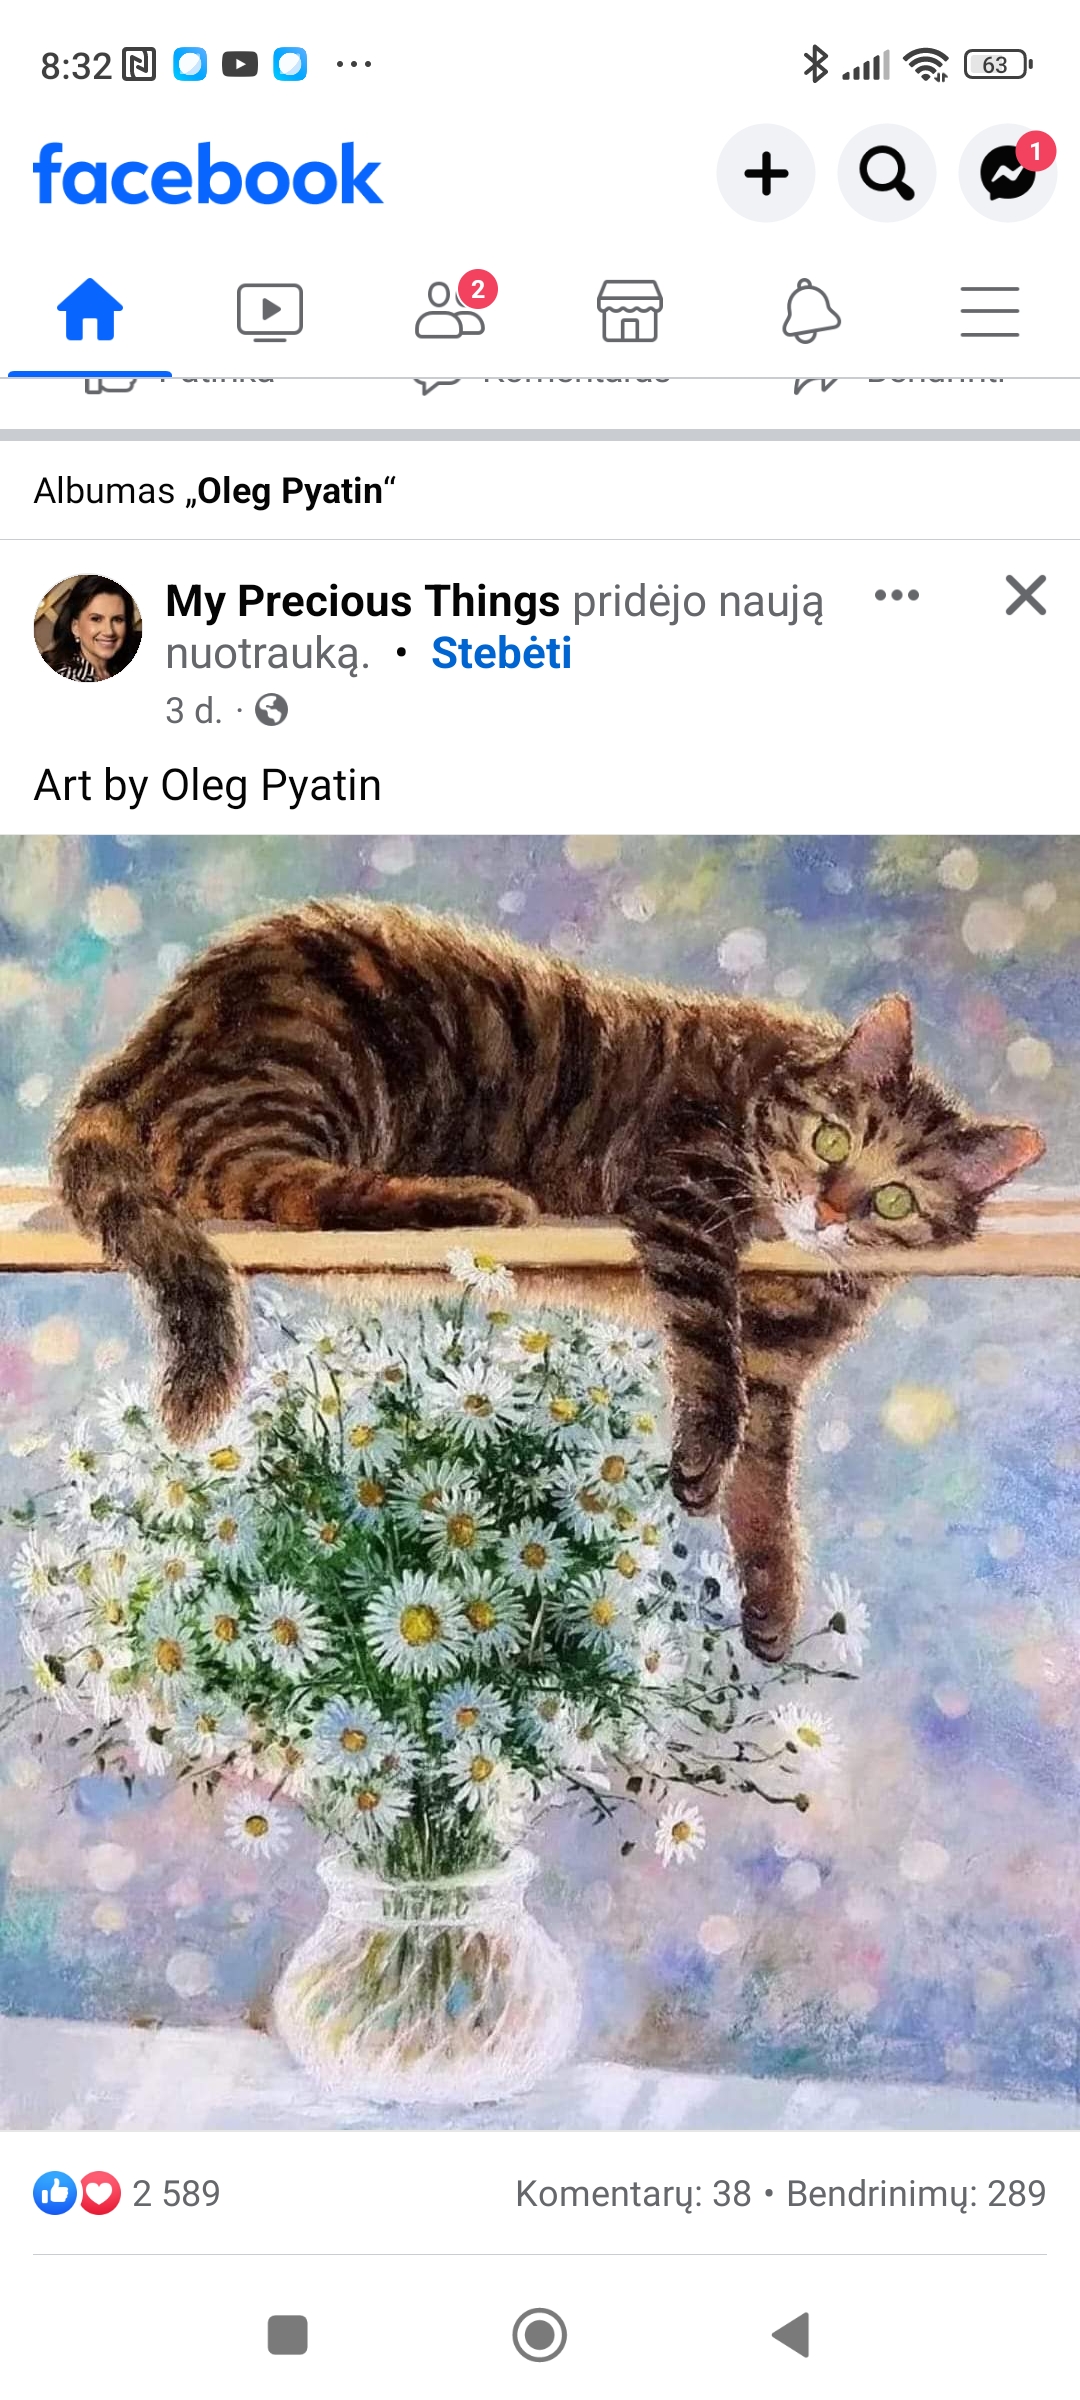 a cat lying on a ledge with a bouquet of flowers